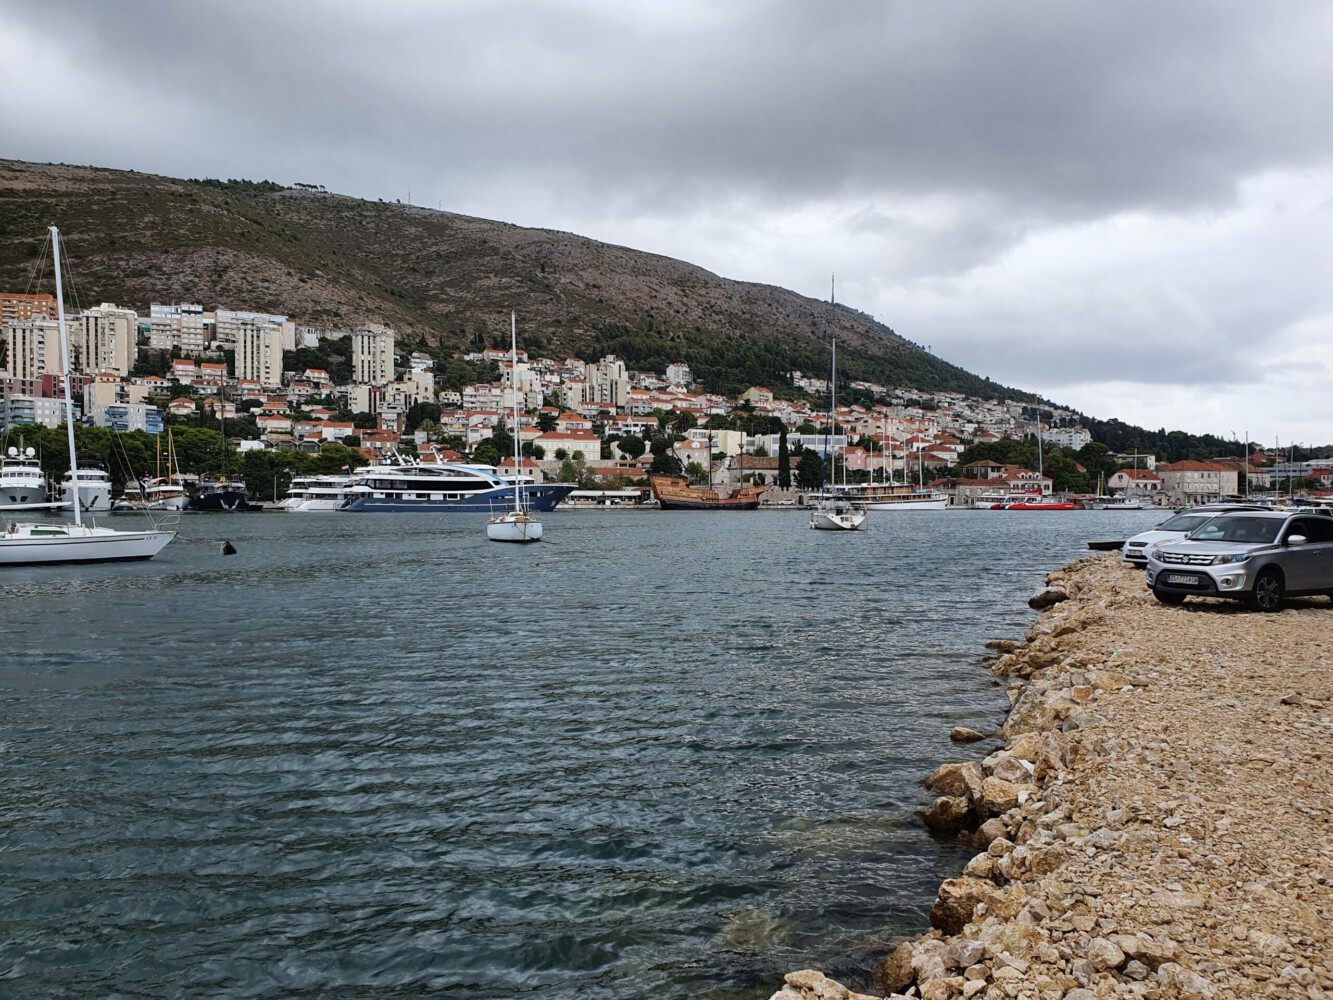 Cloudy in Dubrovnik at our leaving day.